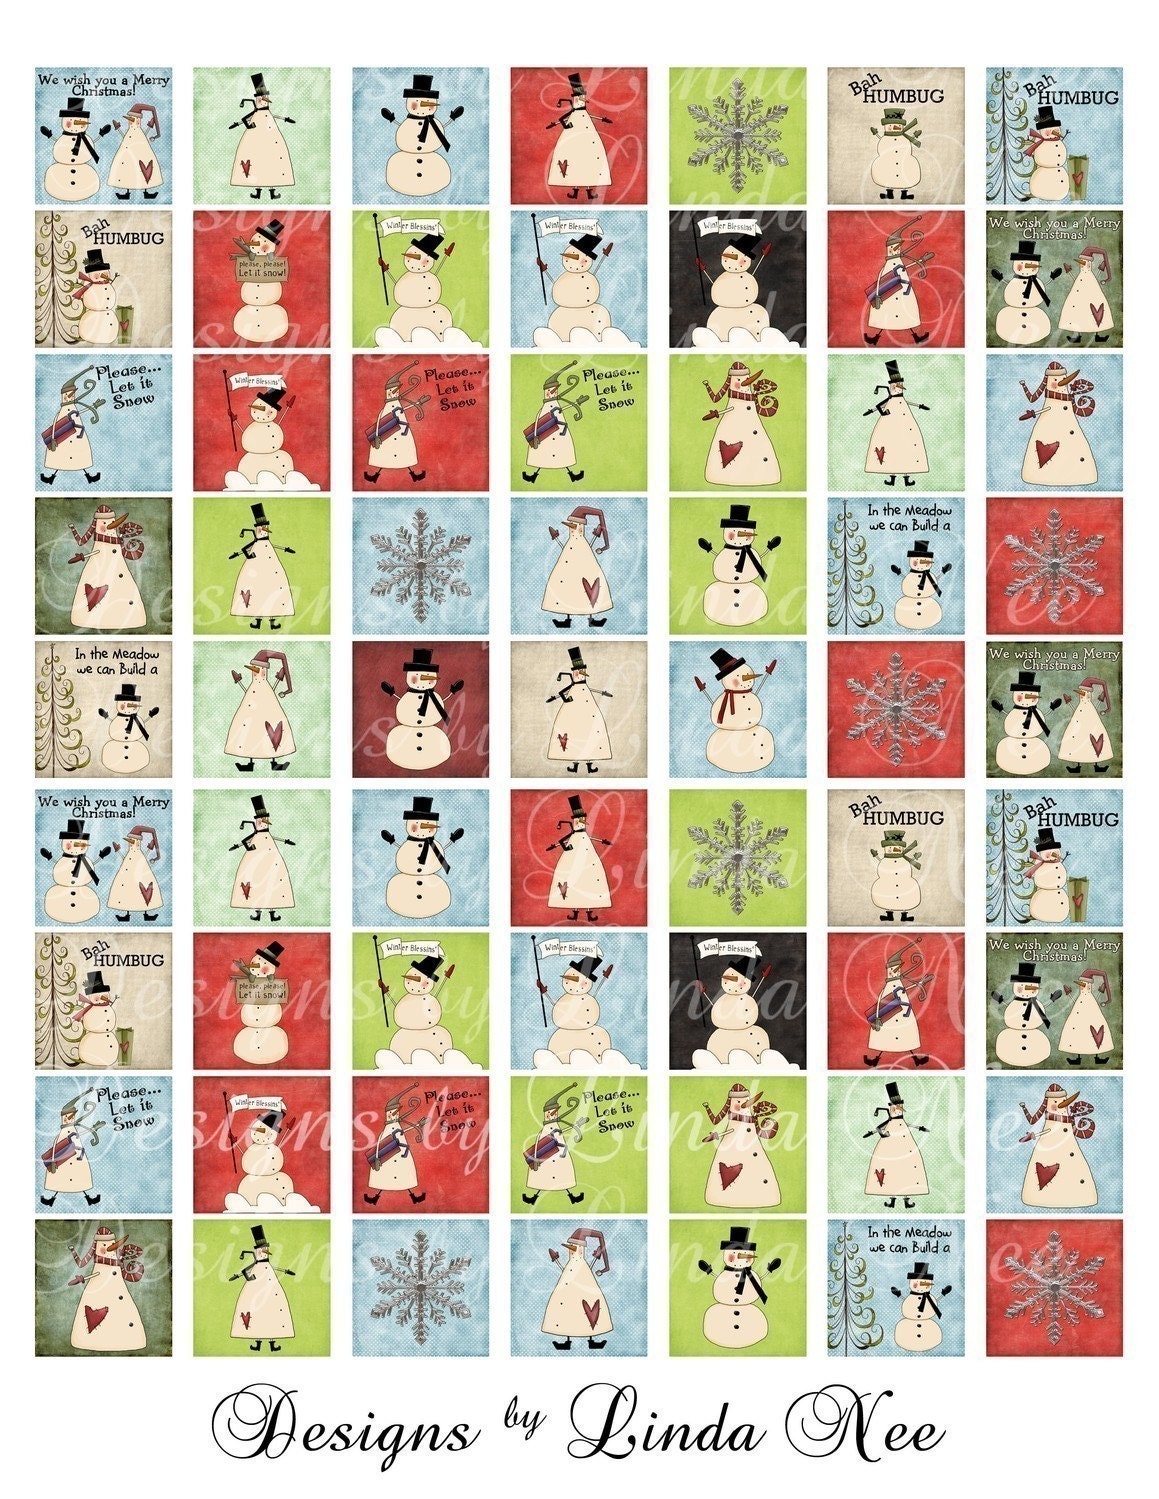 Trendy SNOWMAN 1 x 1 Inch Images Digital Collage Sheet Buy 2 Get 1 FREE SALE -glass wood tiles by Designs by Linda Nee designsbylindanee bird snow winter tree christmas family scrapbooking printable gift tag ephemera embellishment